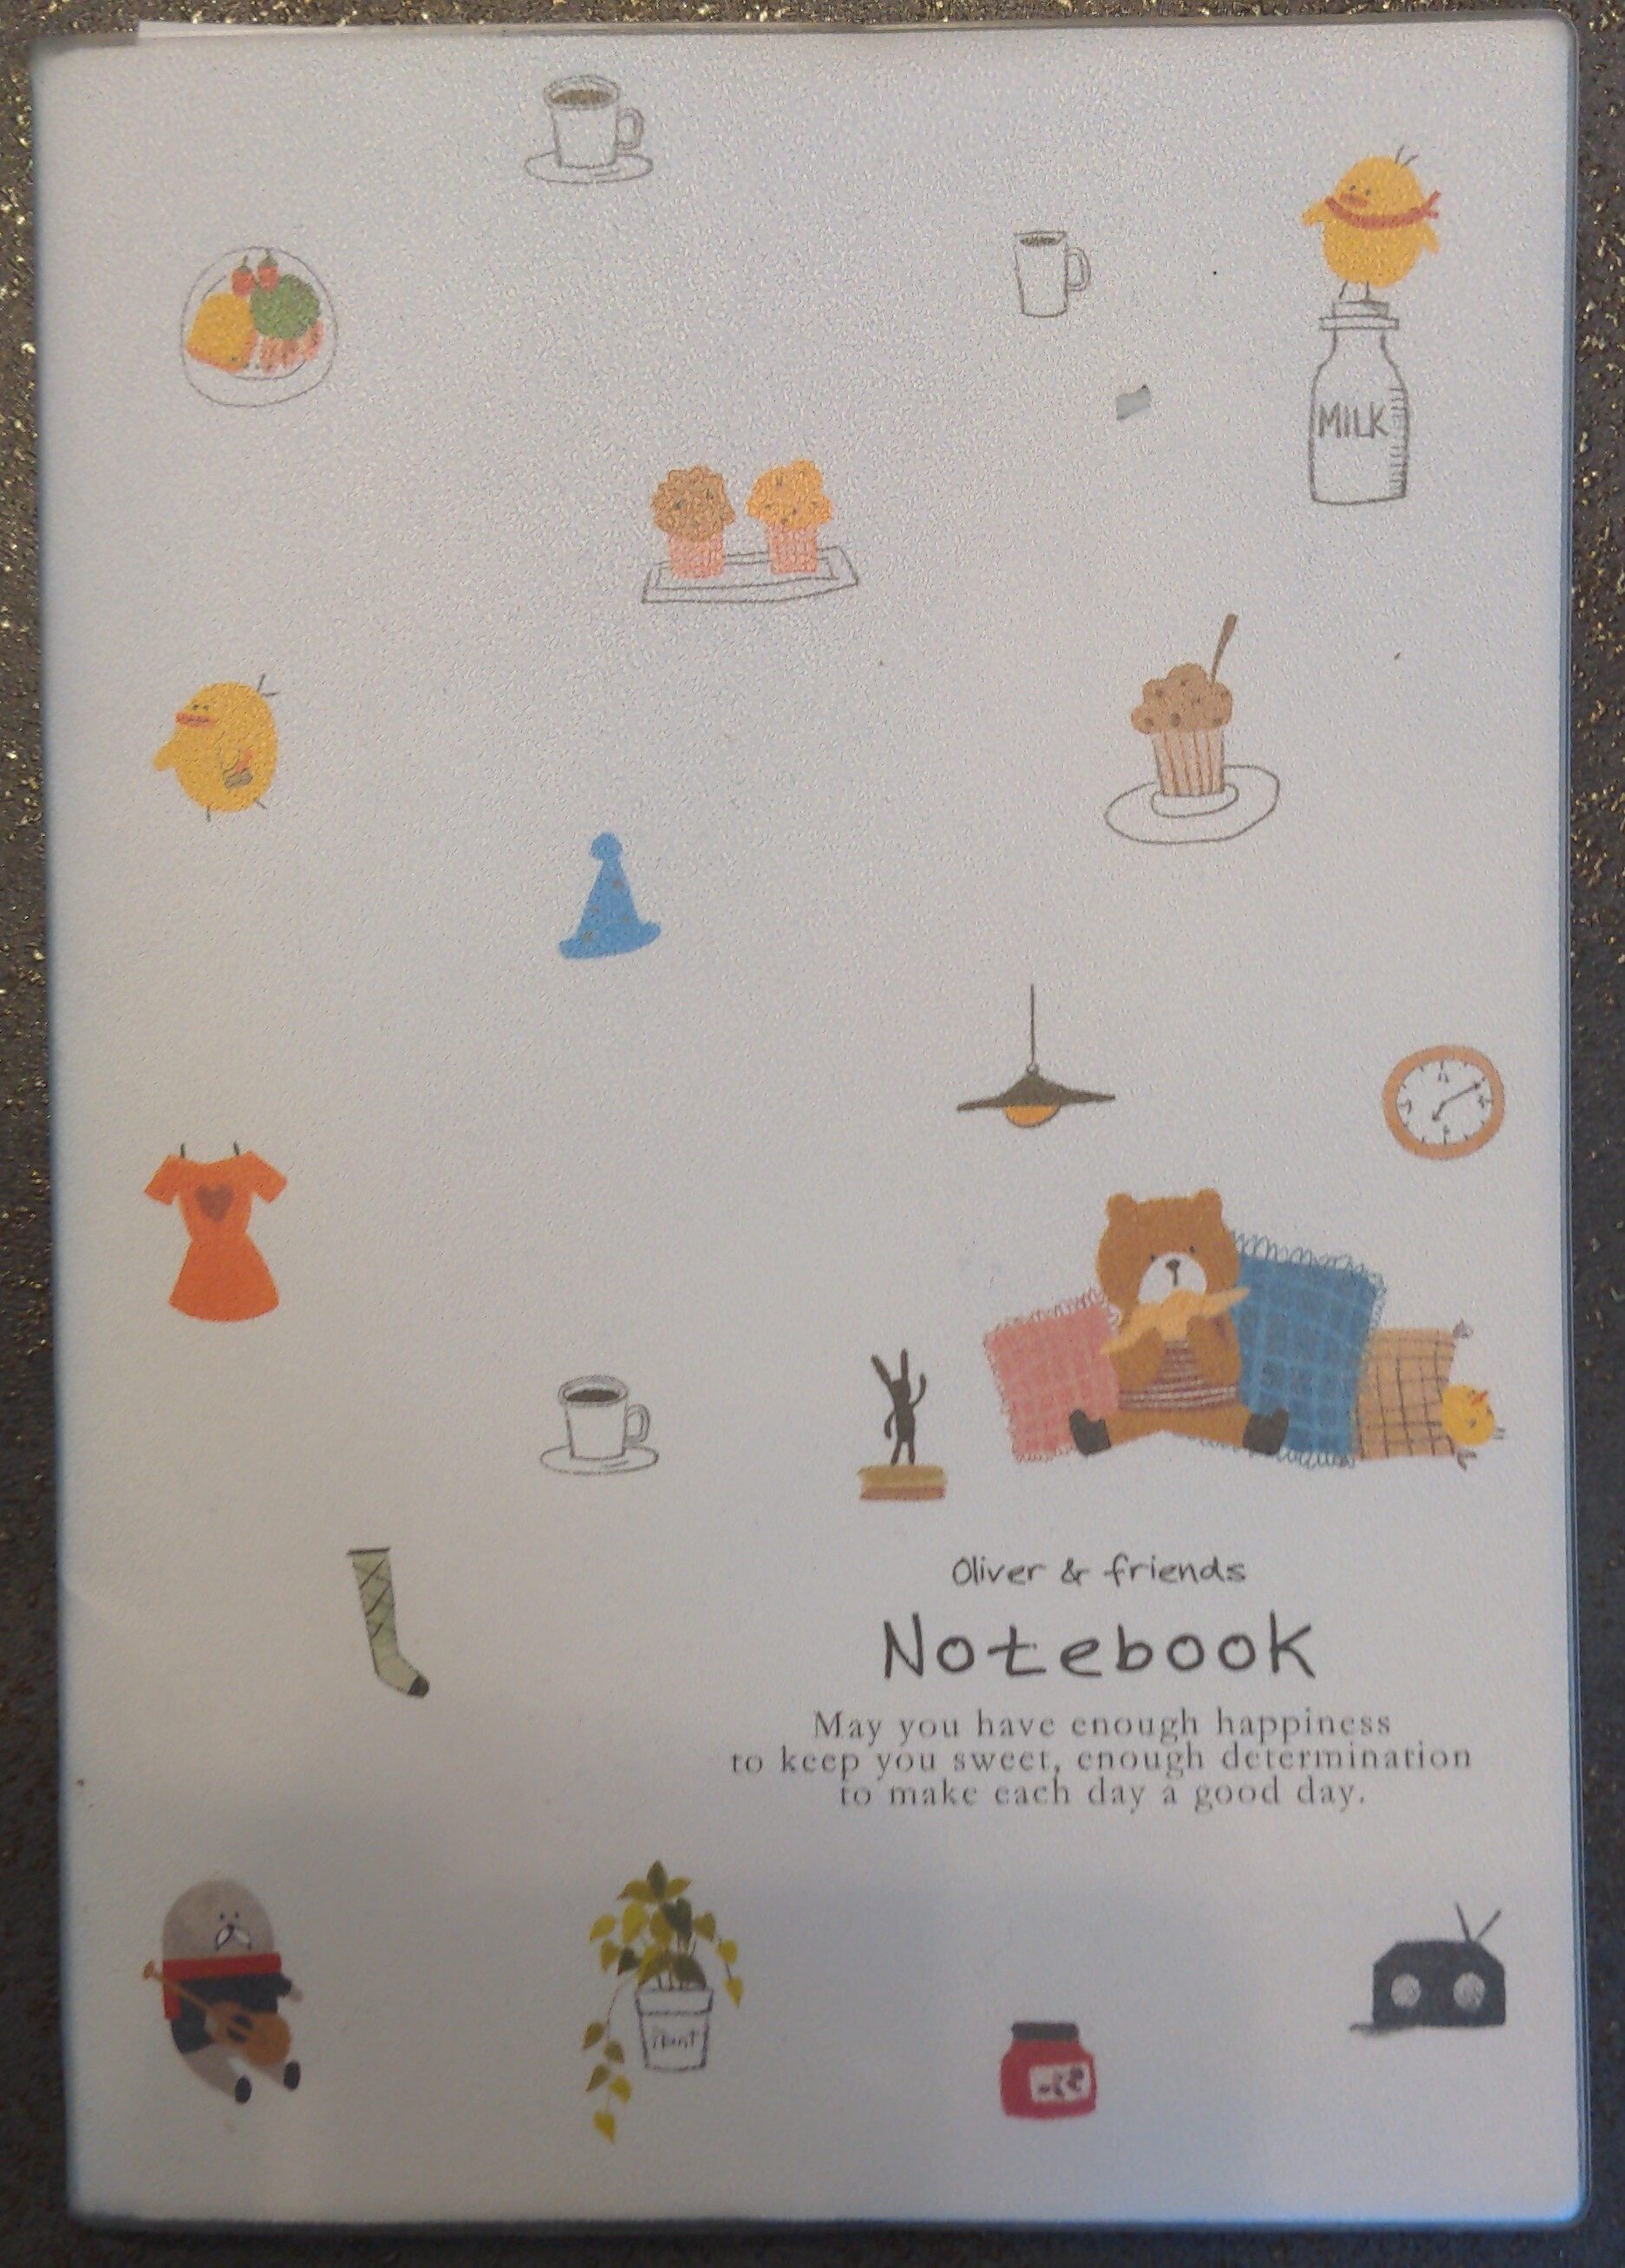 Oliver & friends Notebook - Product - fr